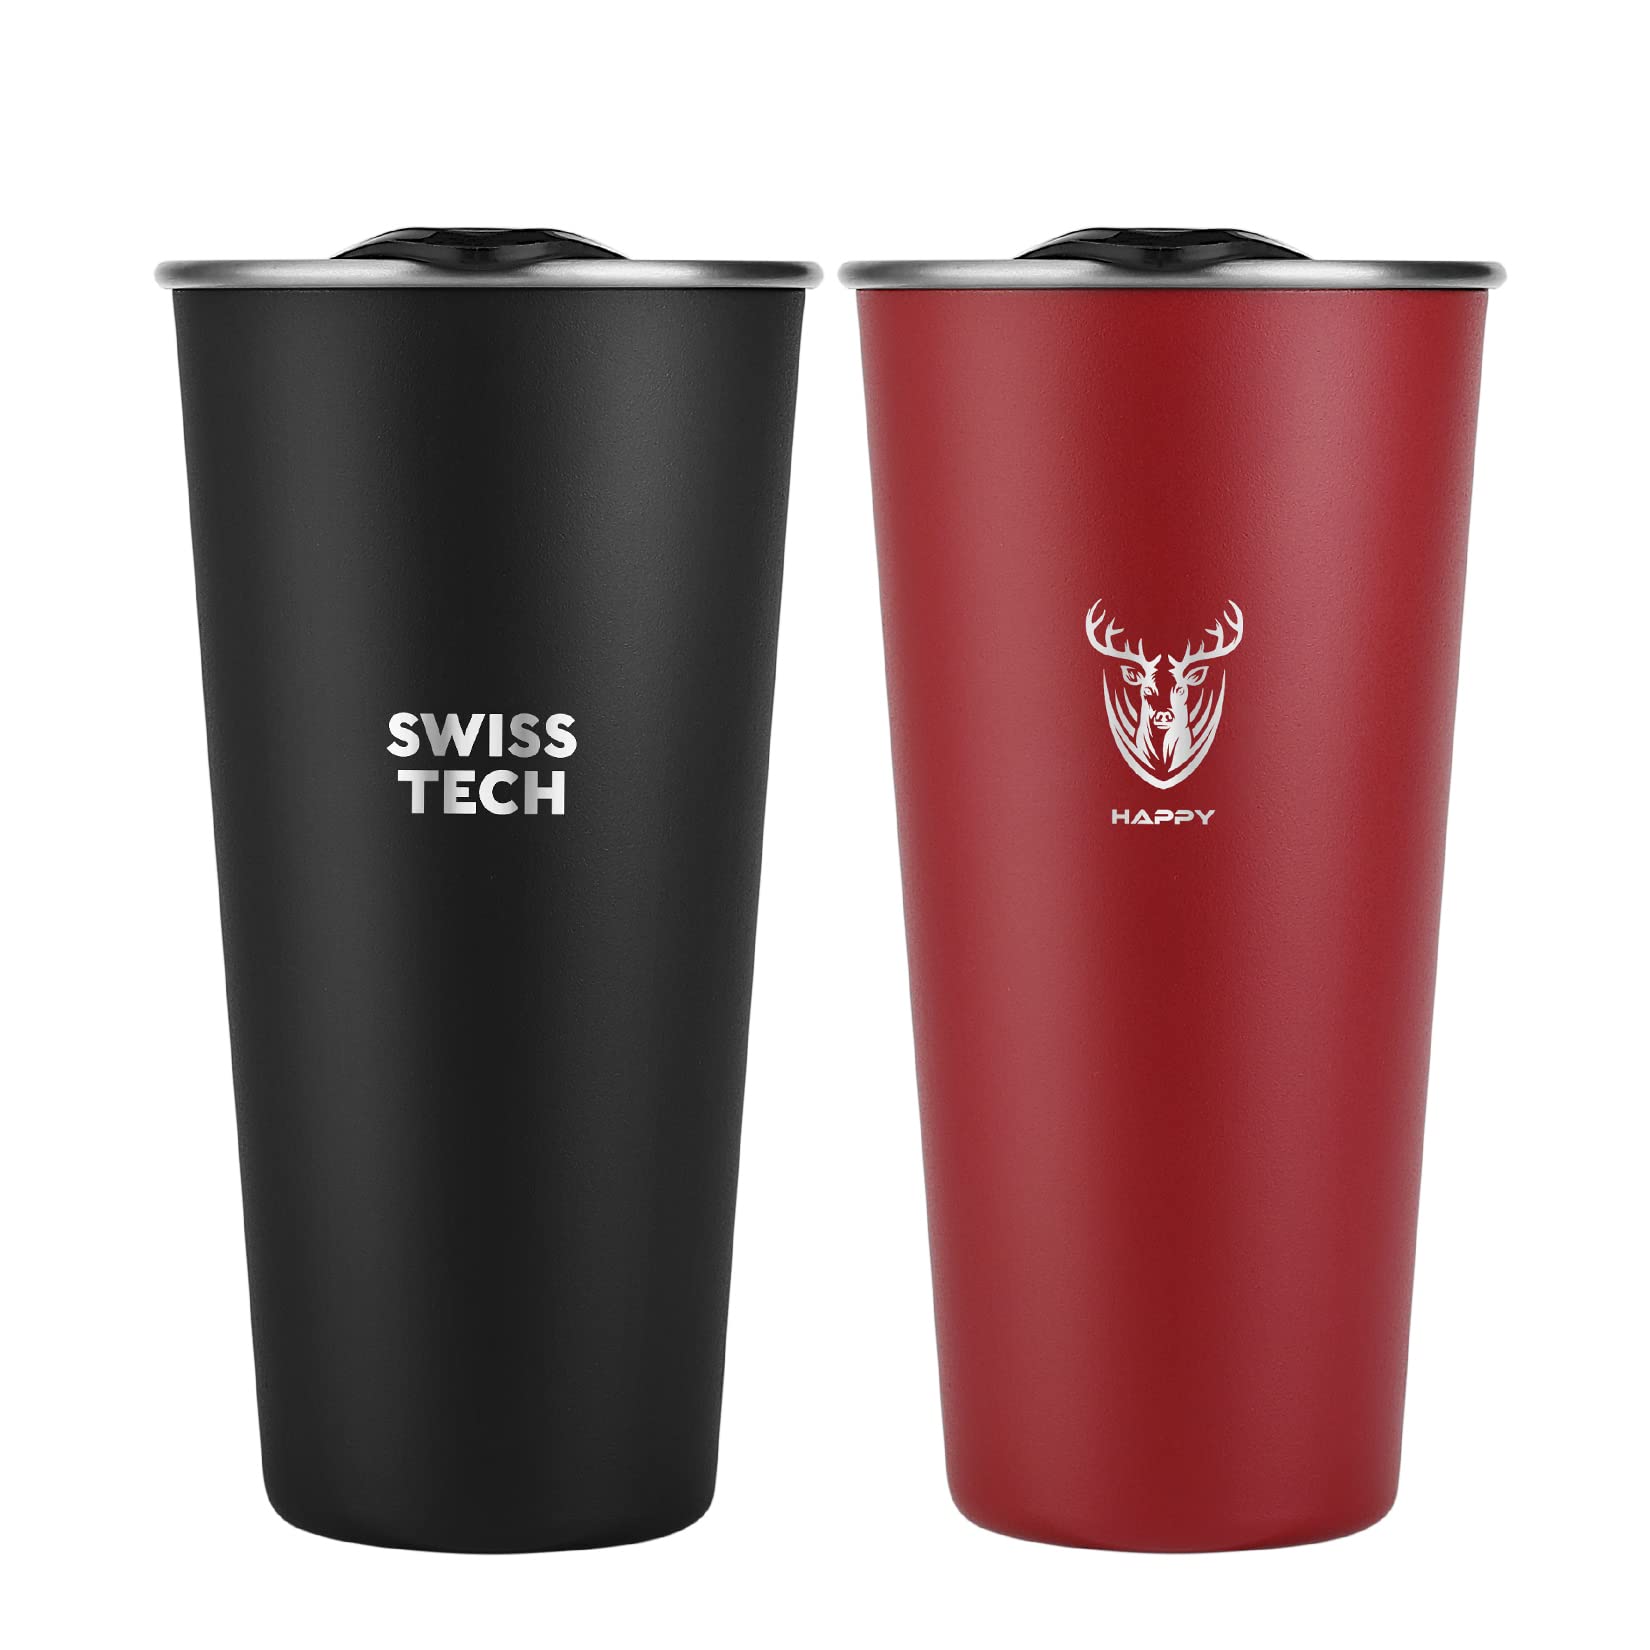 Swiss+Tech 16oz Stainless Steel Cups with lids, 2 Pack Double Wall Pint Cups, Insulated Tumbler with Lid, Unbreakable Durable Cups, Color Options:  Red & Black, Turquoise & Black, and Red & White